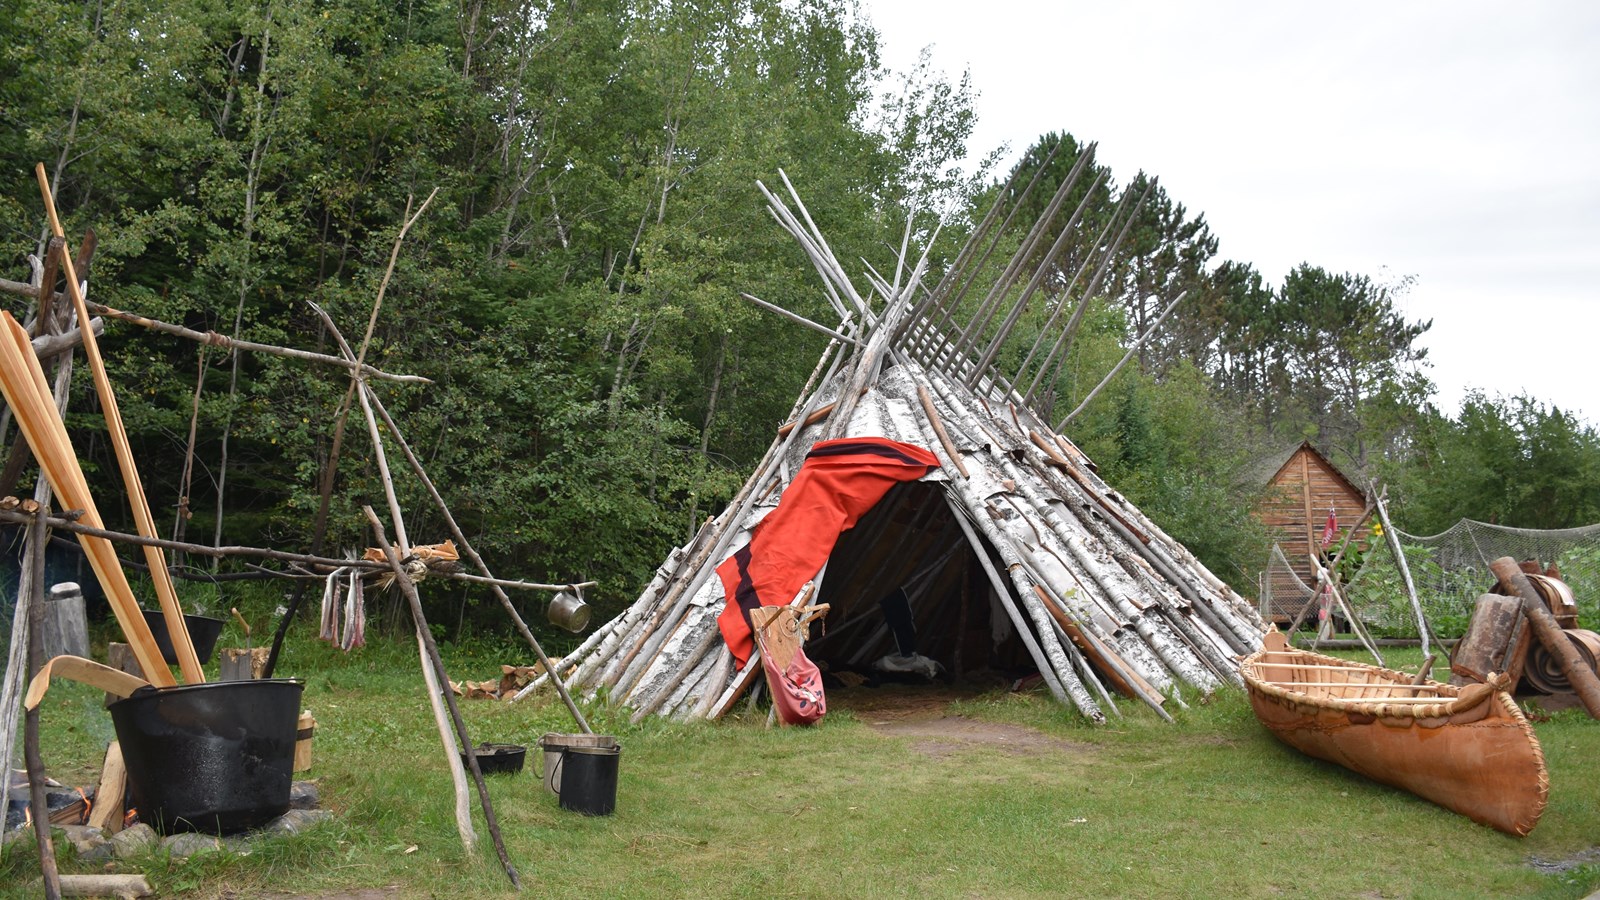 Birch bark tipi, canoe, and other Ojibwe cultural items on a grassy area.